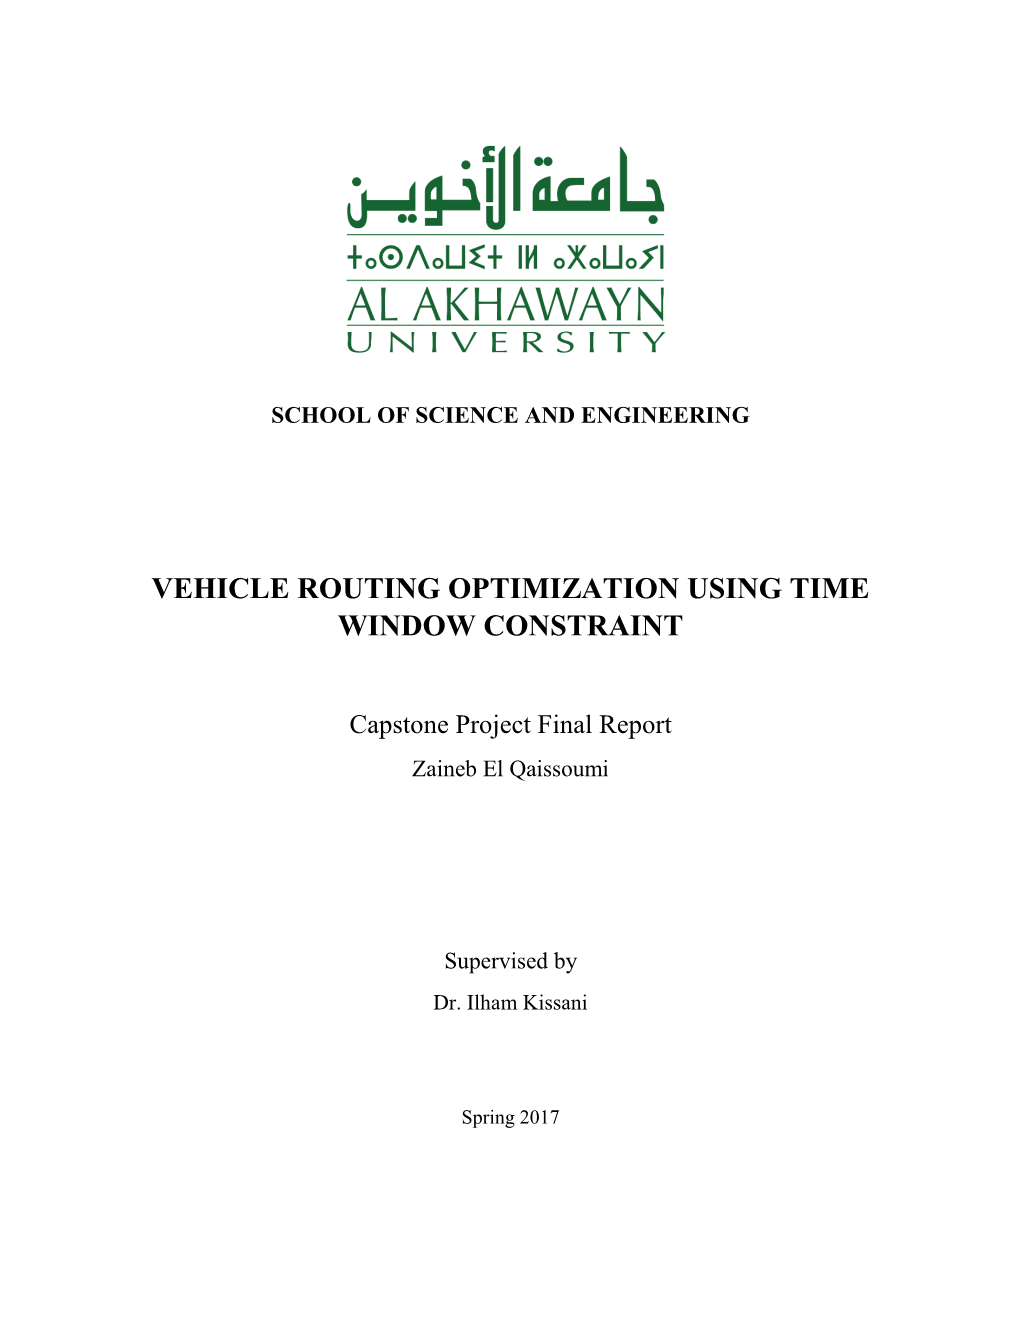 Vehicle Routing Optimization Using Time Window Constraint